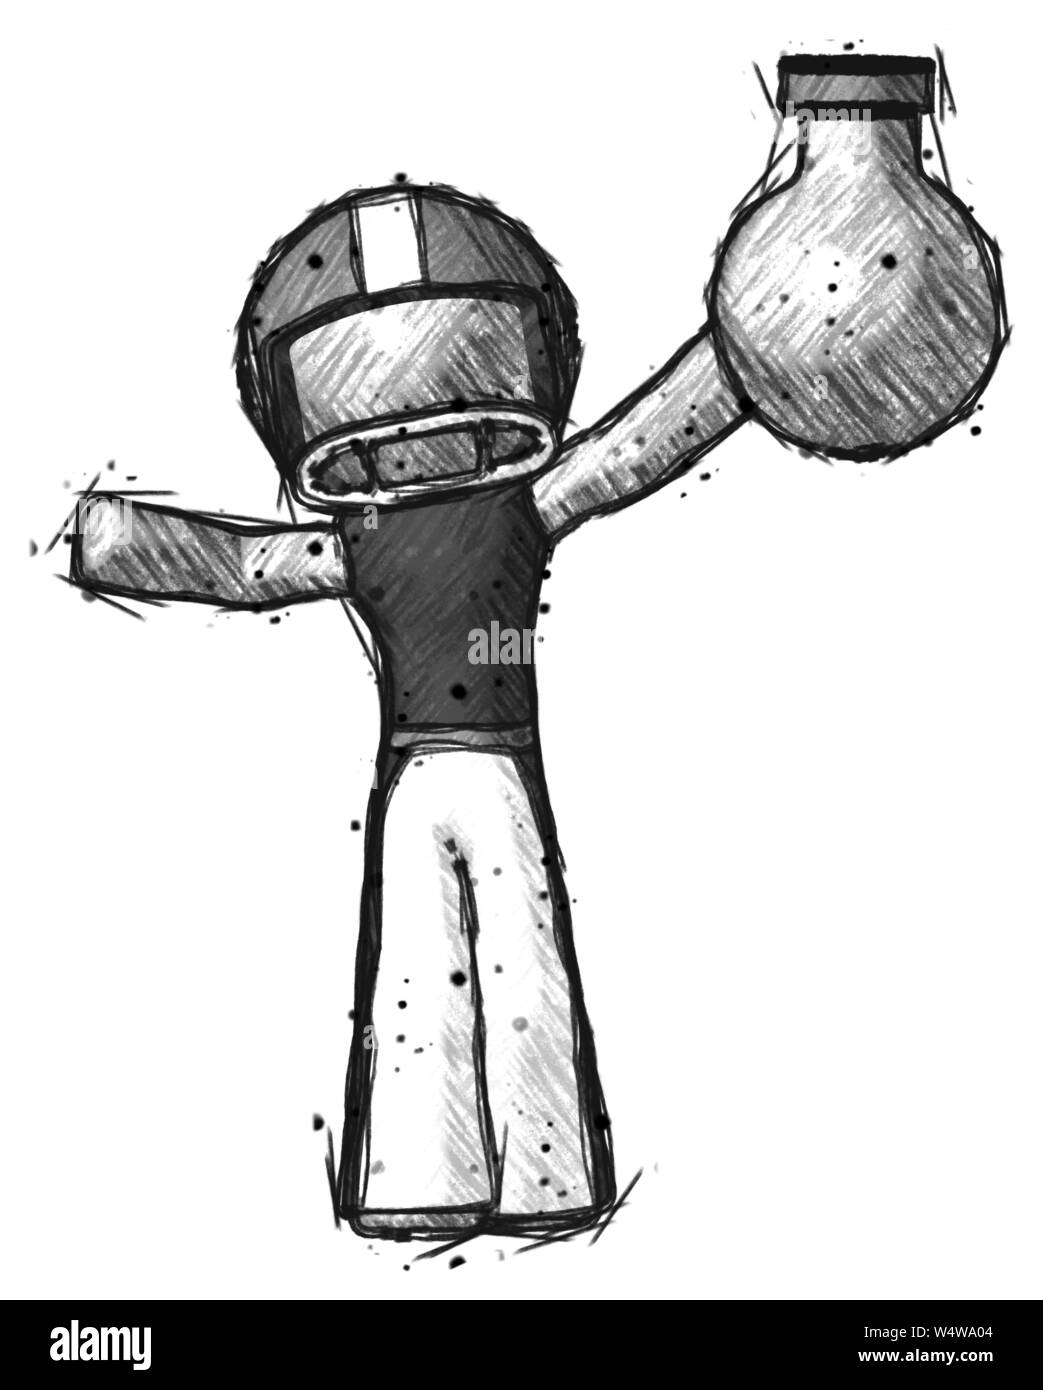 Sketch football player man holding large round flask or beaker. Stock Photo